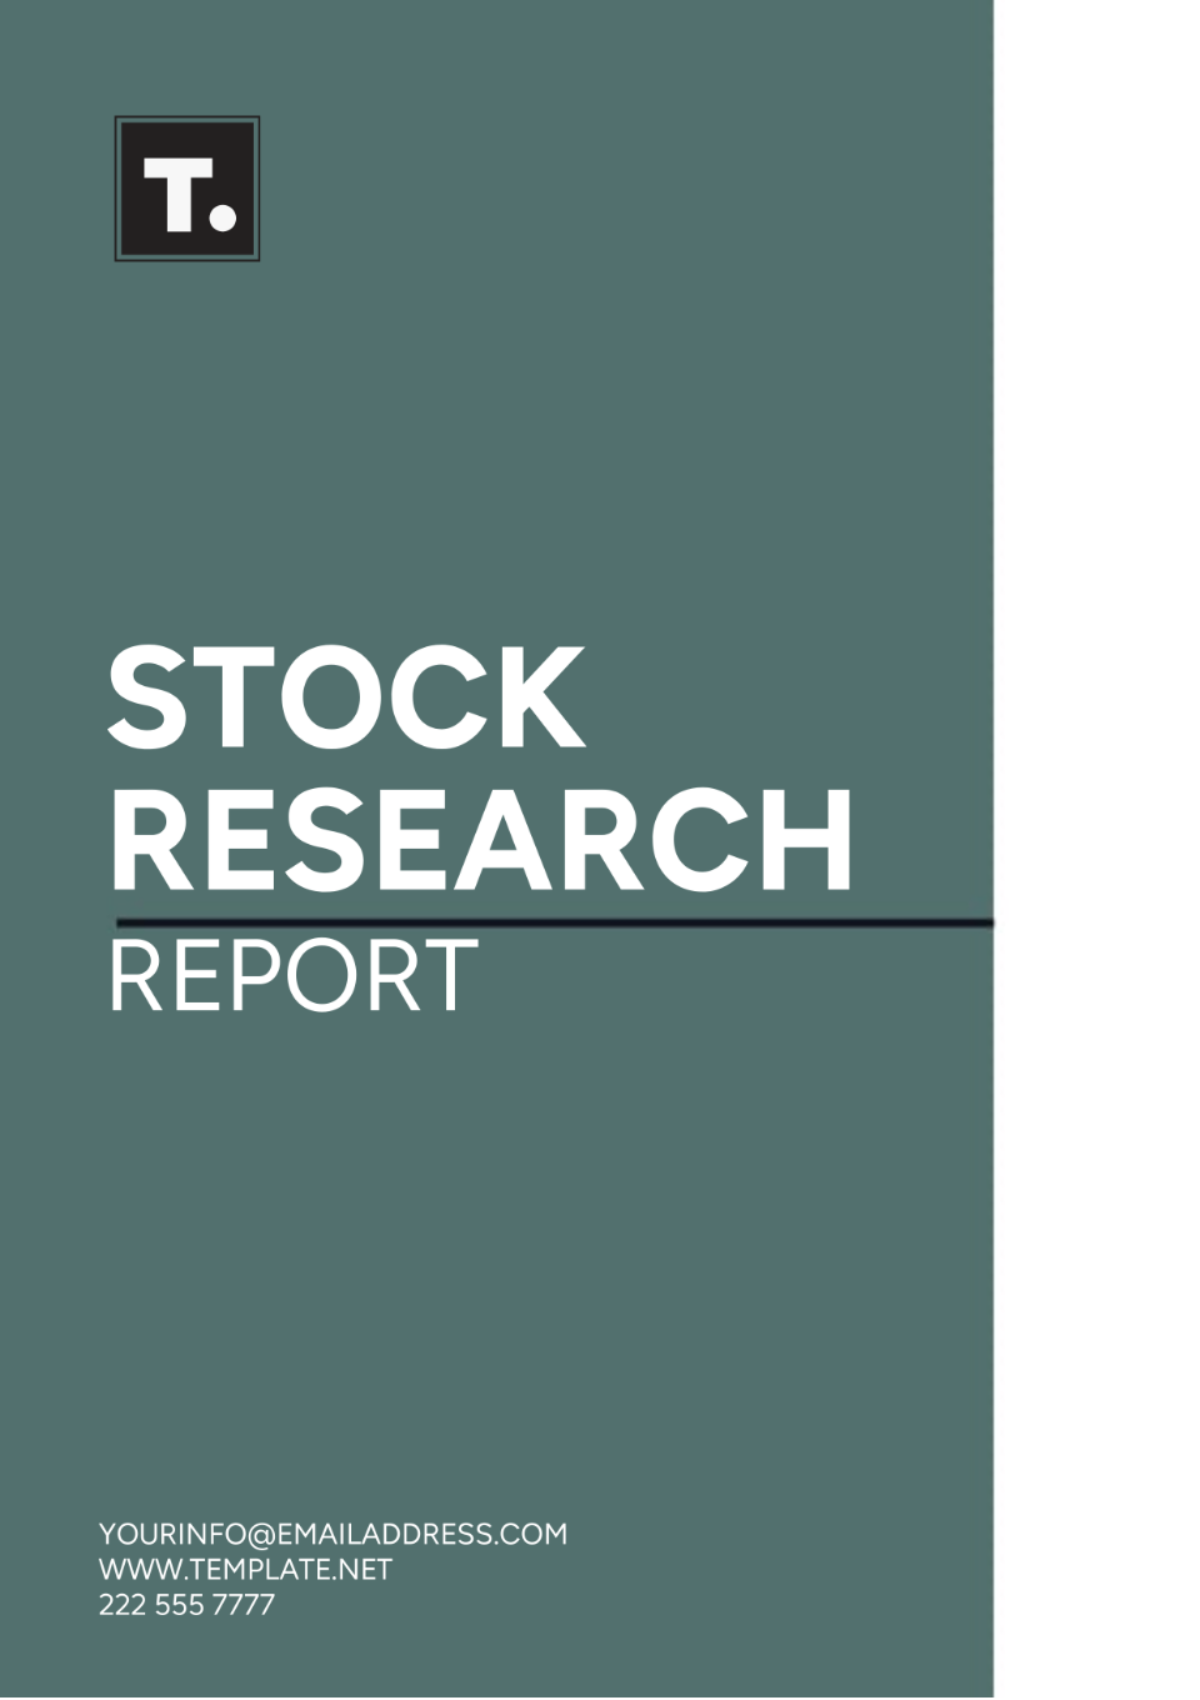 Free Stock Research Report Template